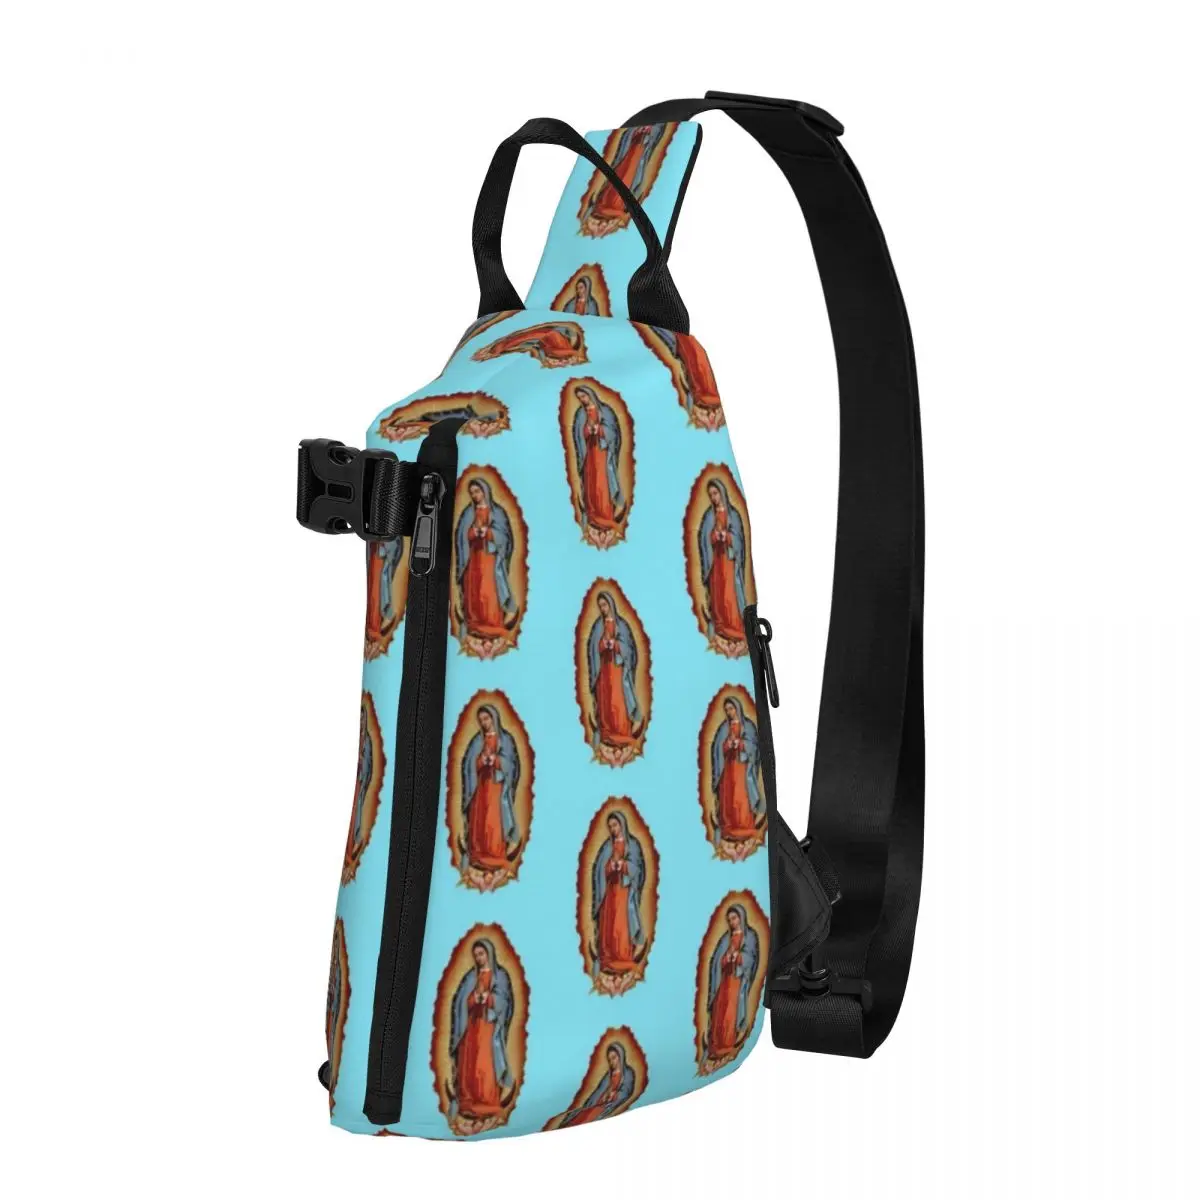 

Virgin Mary Maria Shoulder Bags Diego De Guadalupe Workout Chest Bag Sports Graphic Design Sling Bag Cool School Crossbody Bags